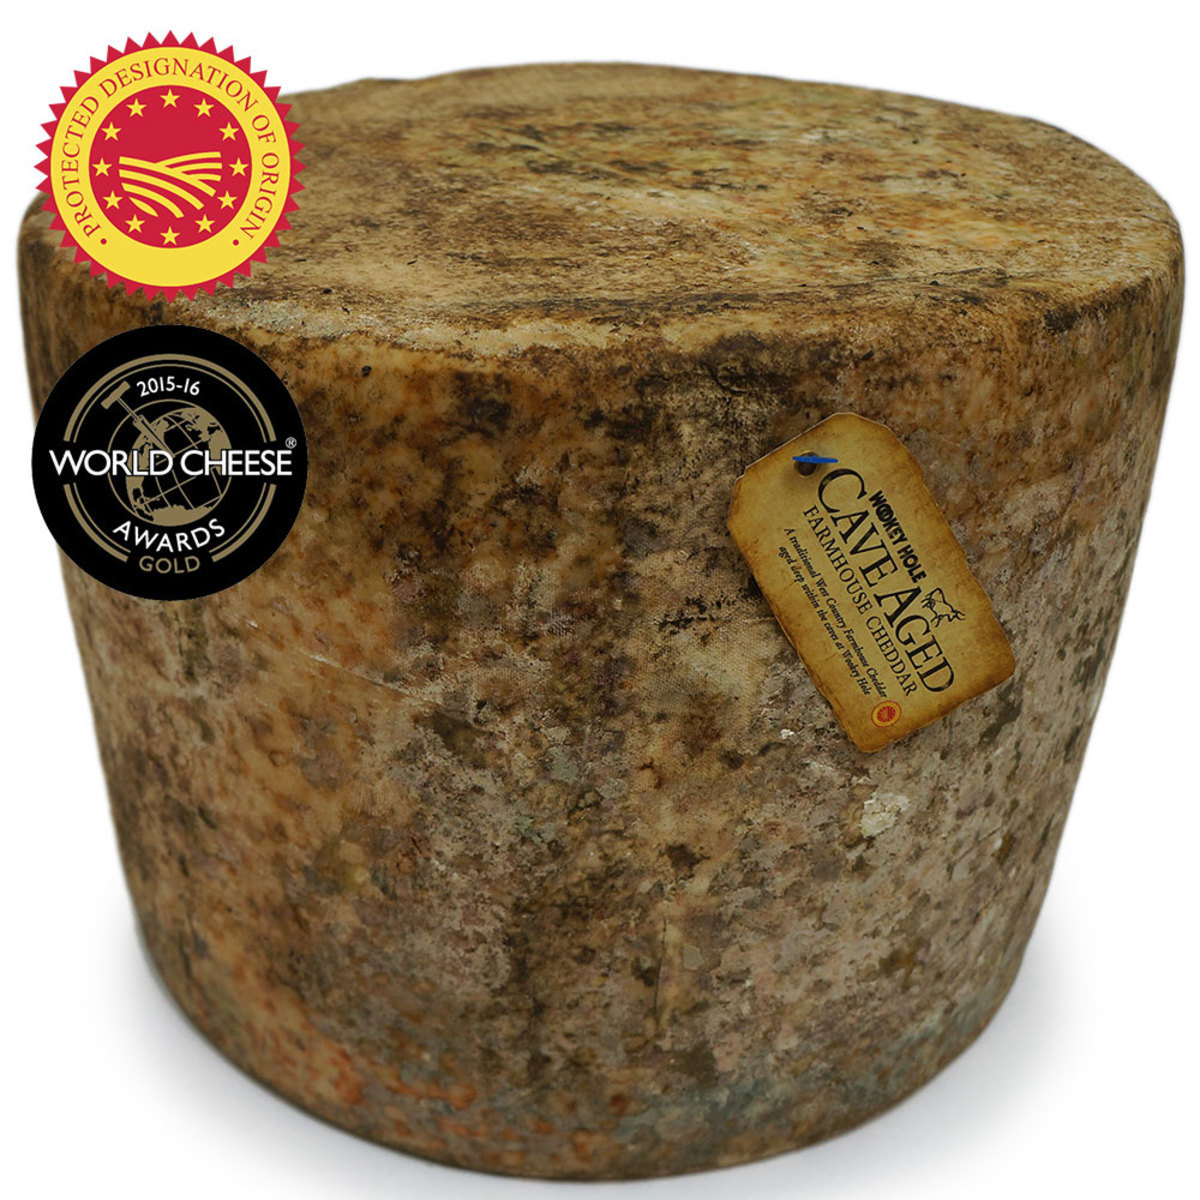 Ford Farm Wookey Hole Cave Aged 27kg Whole Cheddar Cheese